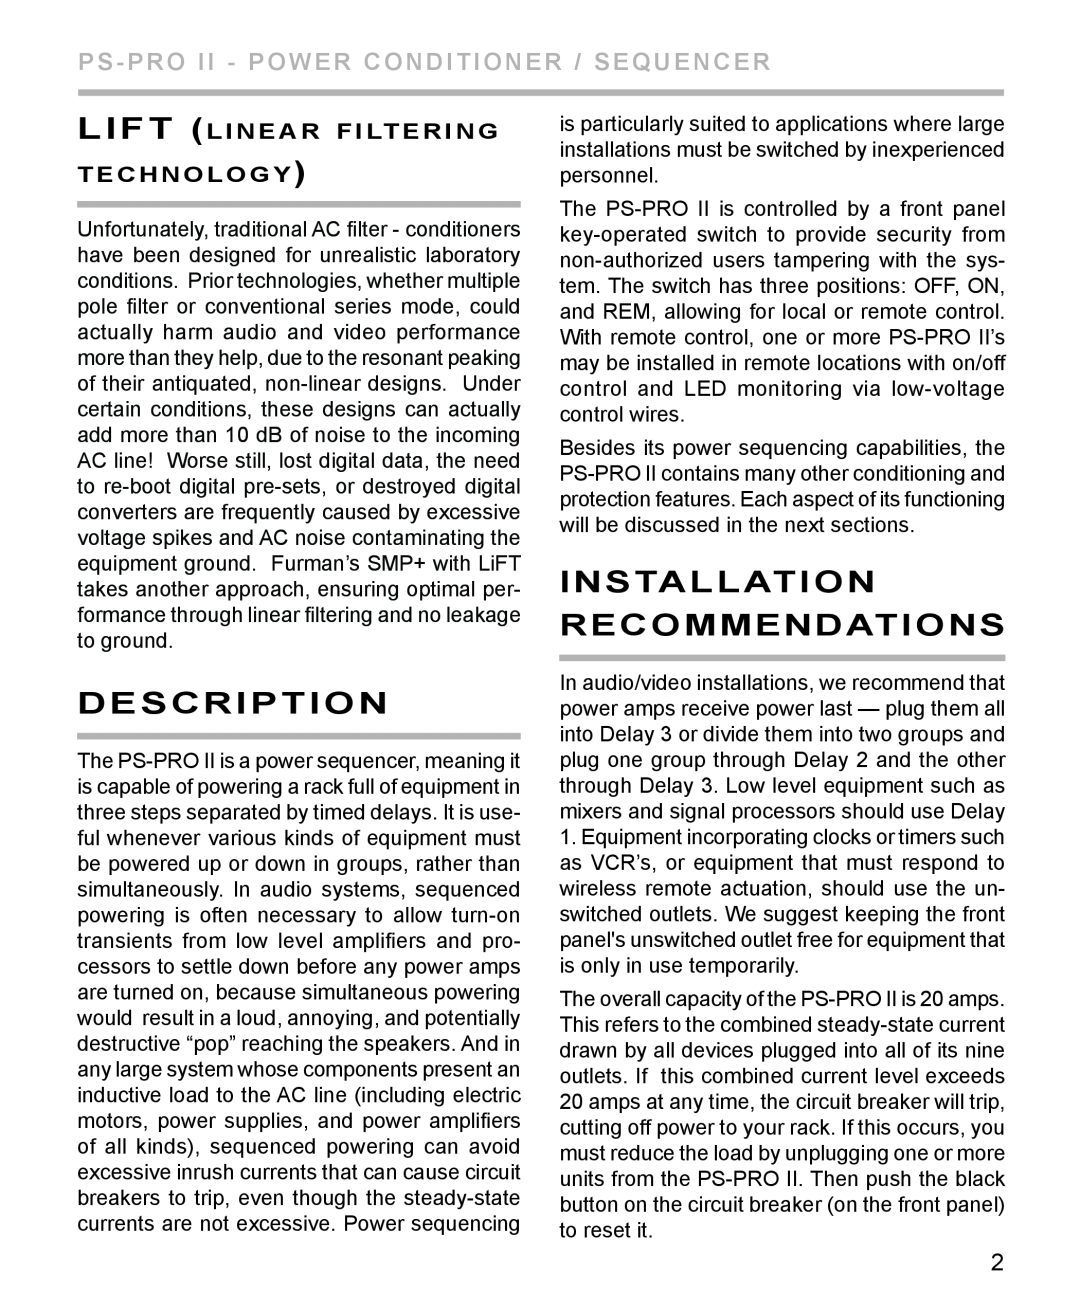 Furman Sound PS-PRO II manual Description, installation recommendations, PS - PRO II - POWER CONDITIONER / sequencer 